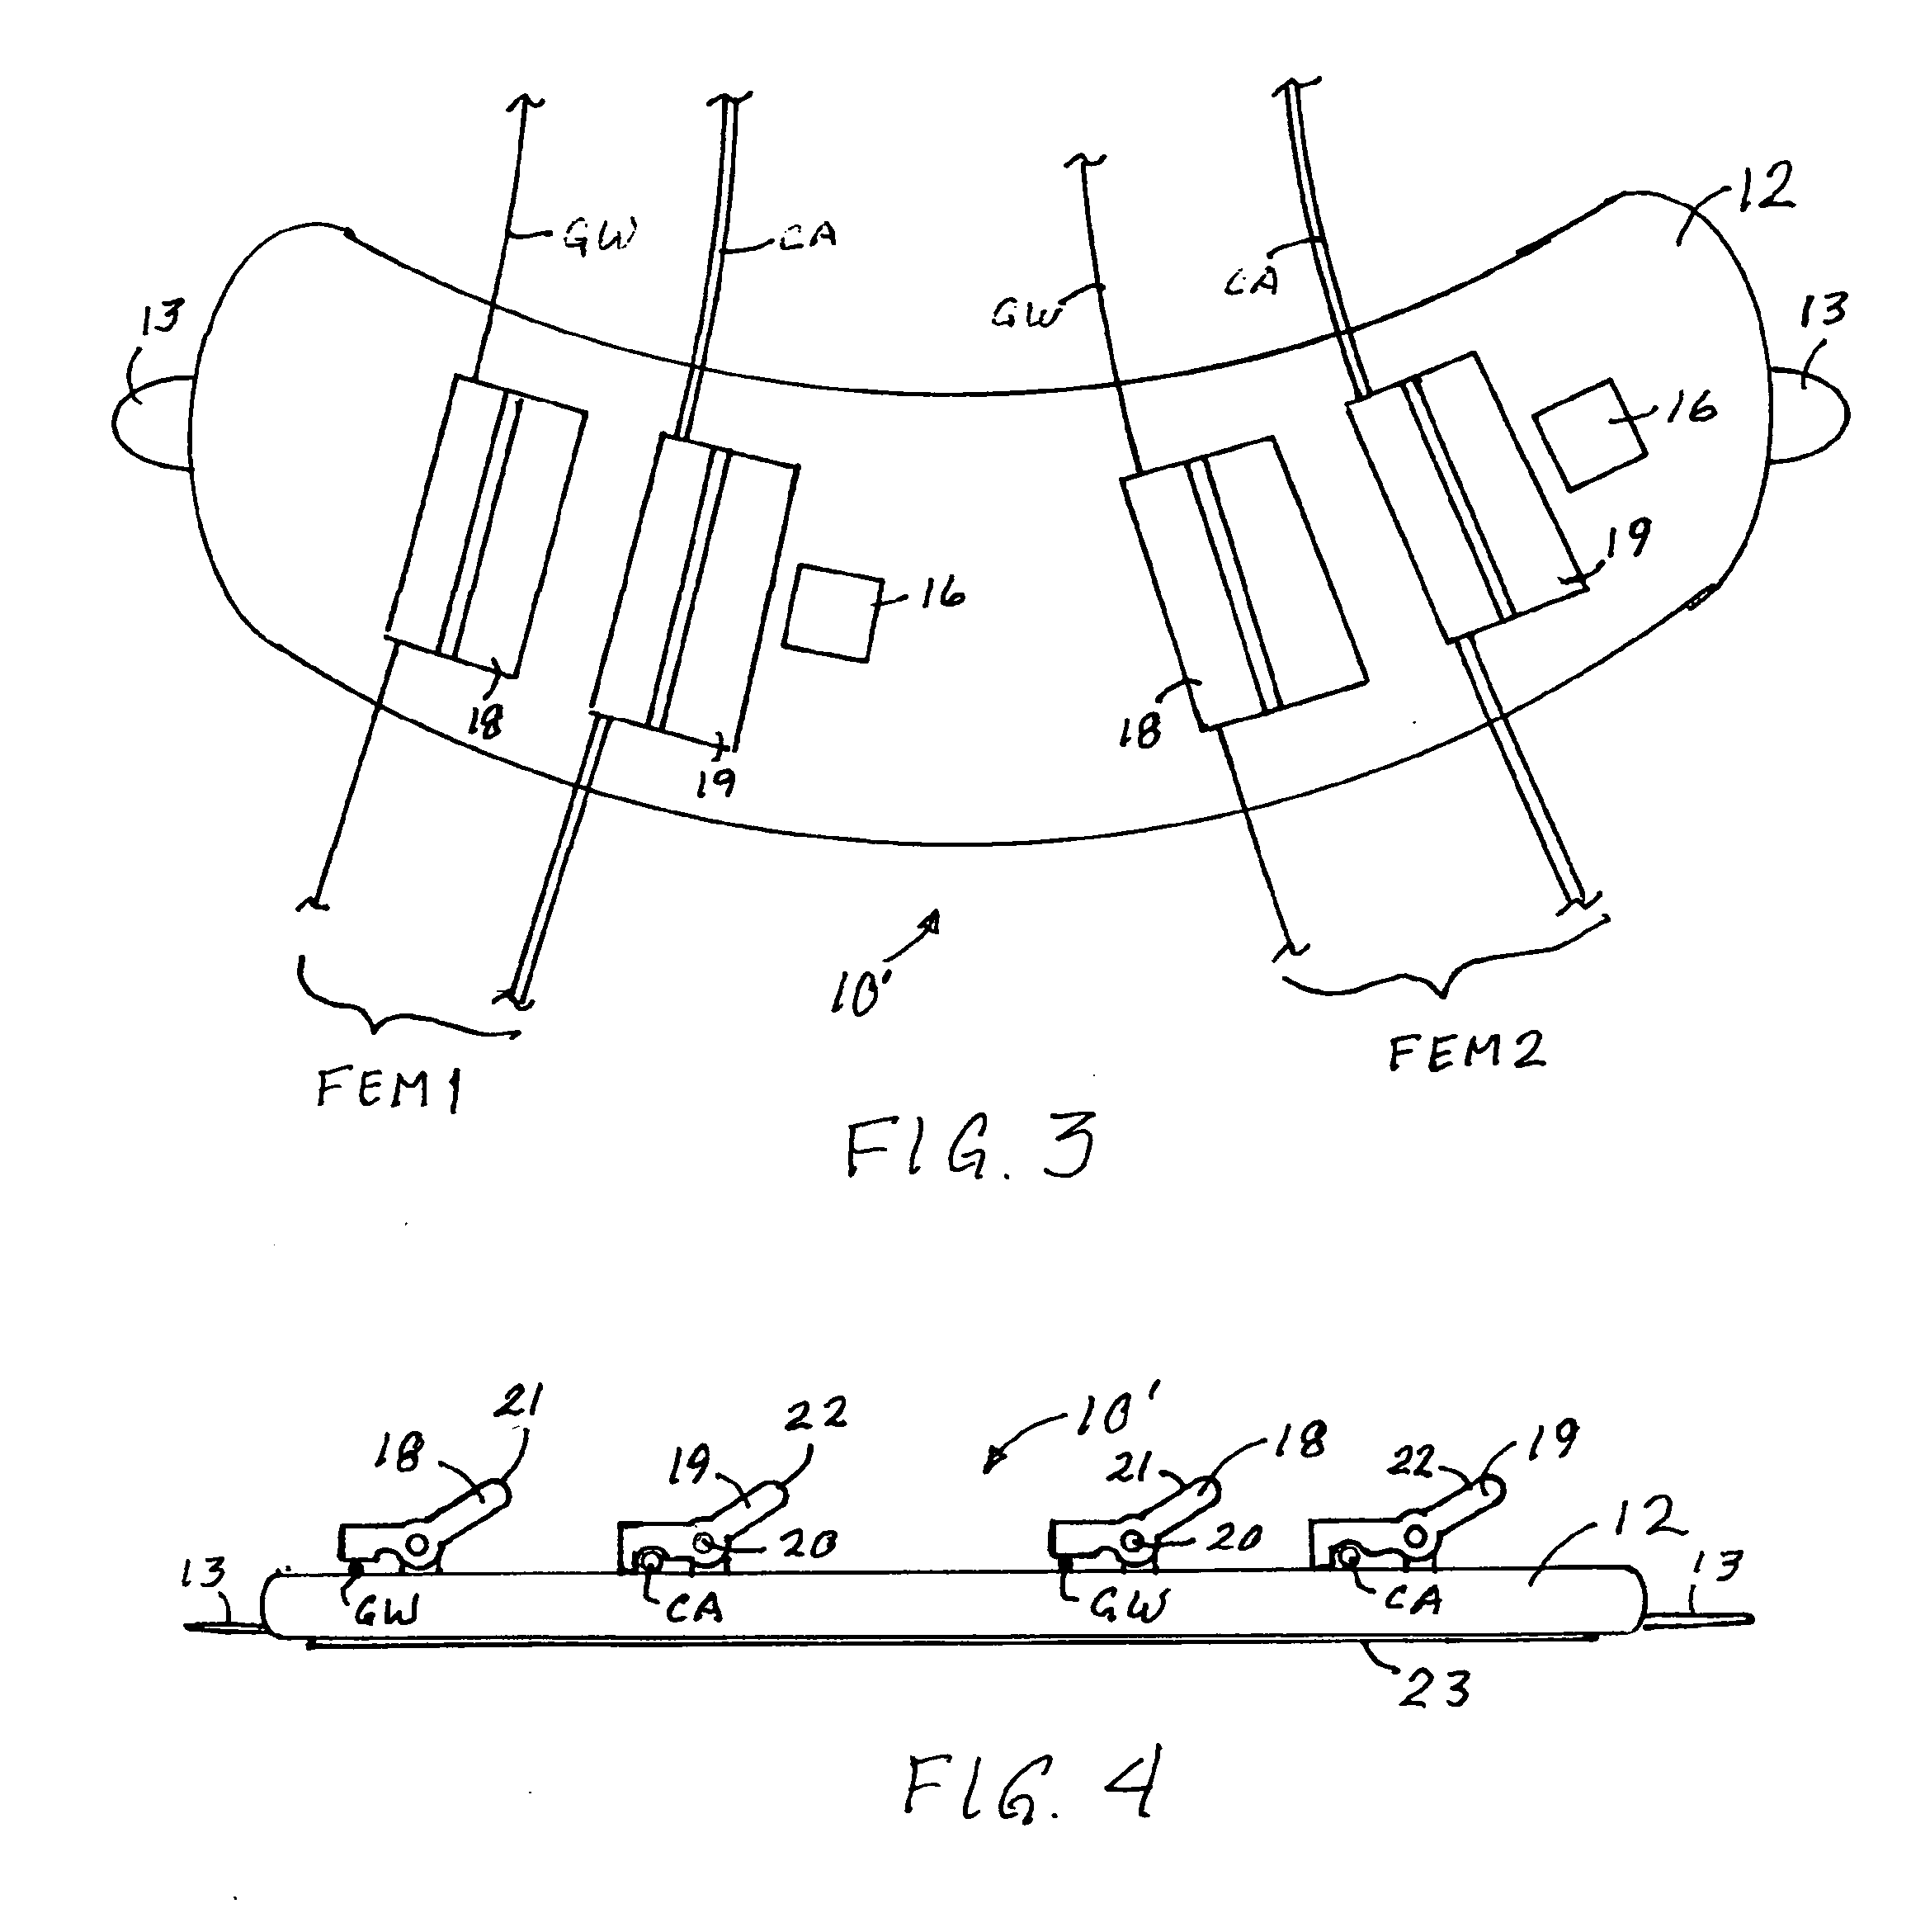 Guide wire and catheter management device